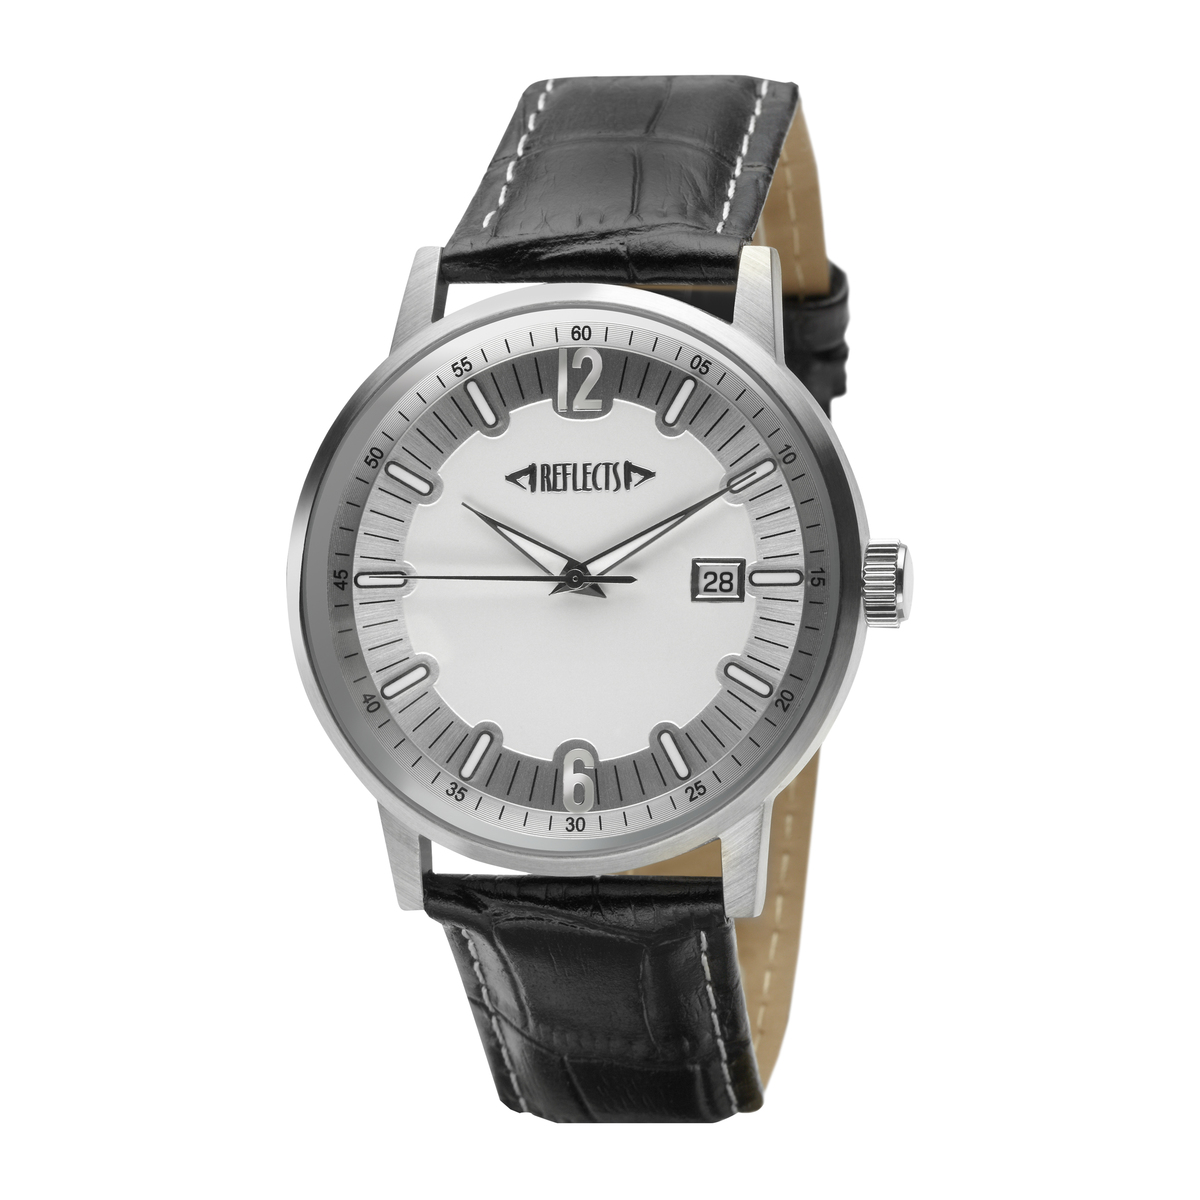 LM Armbanduhr REFLECTS-CLASSIC SILVER silber